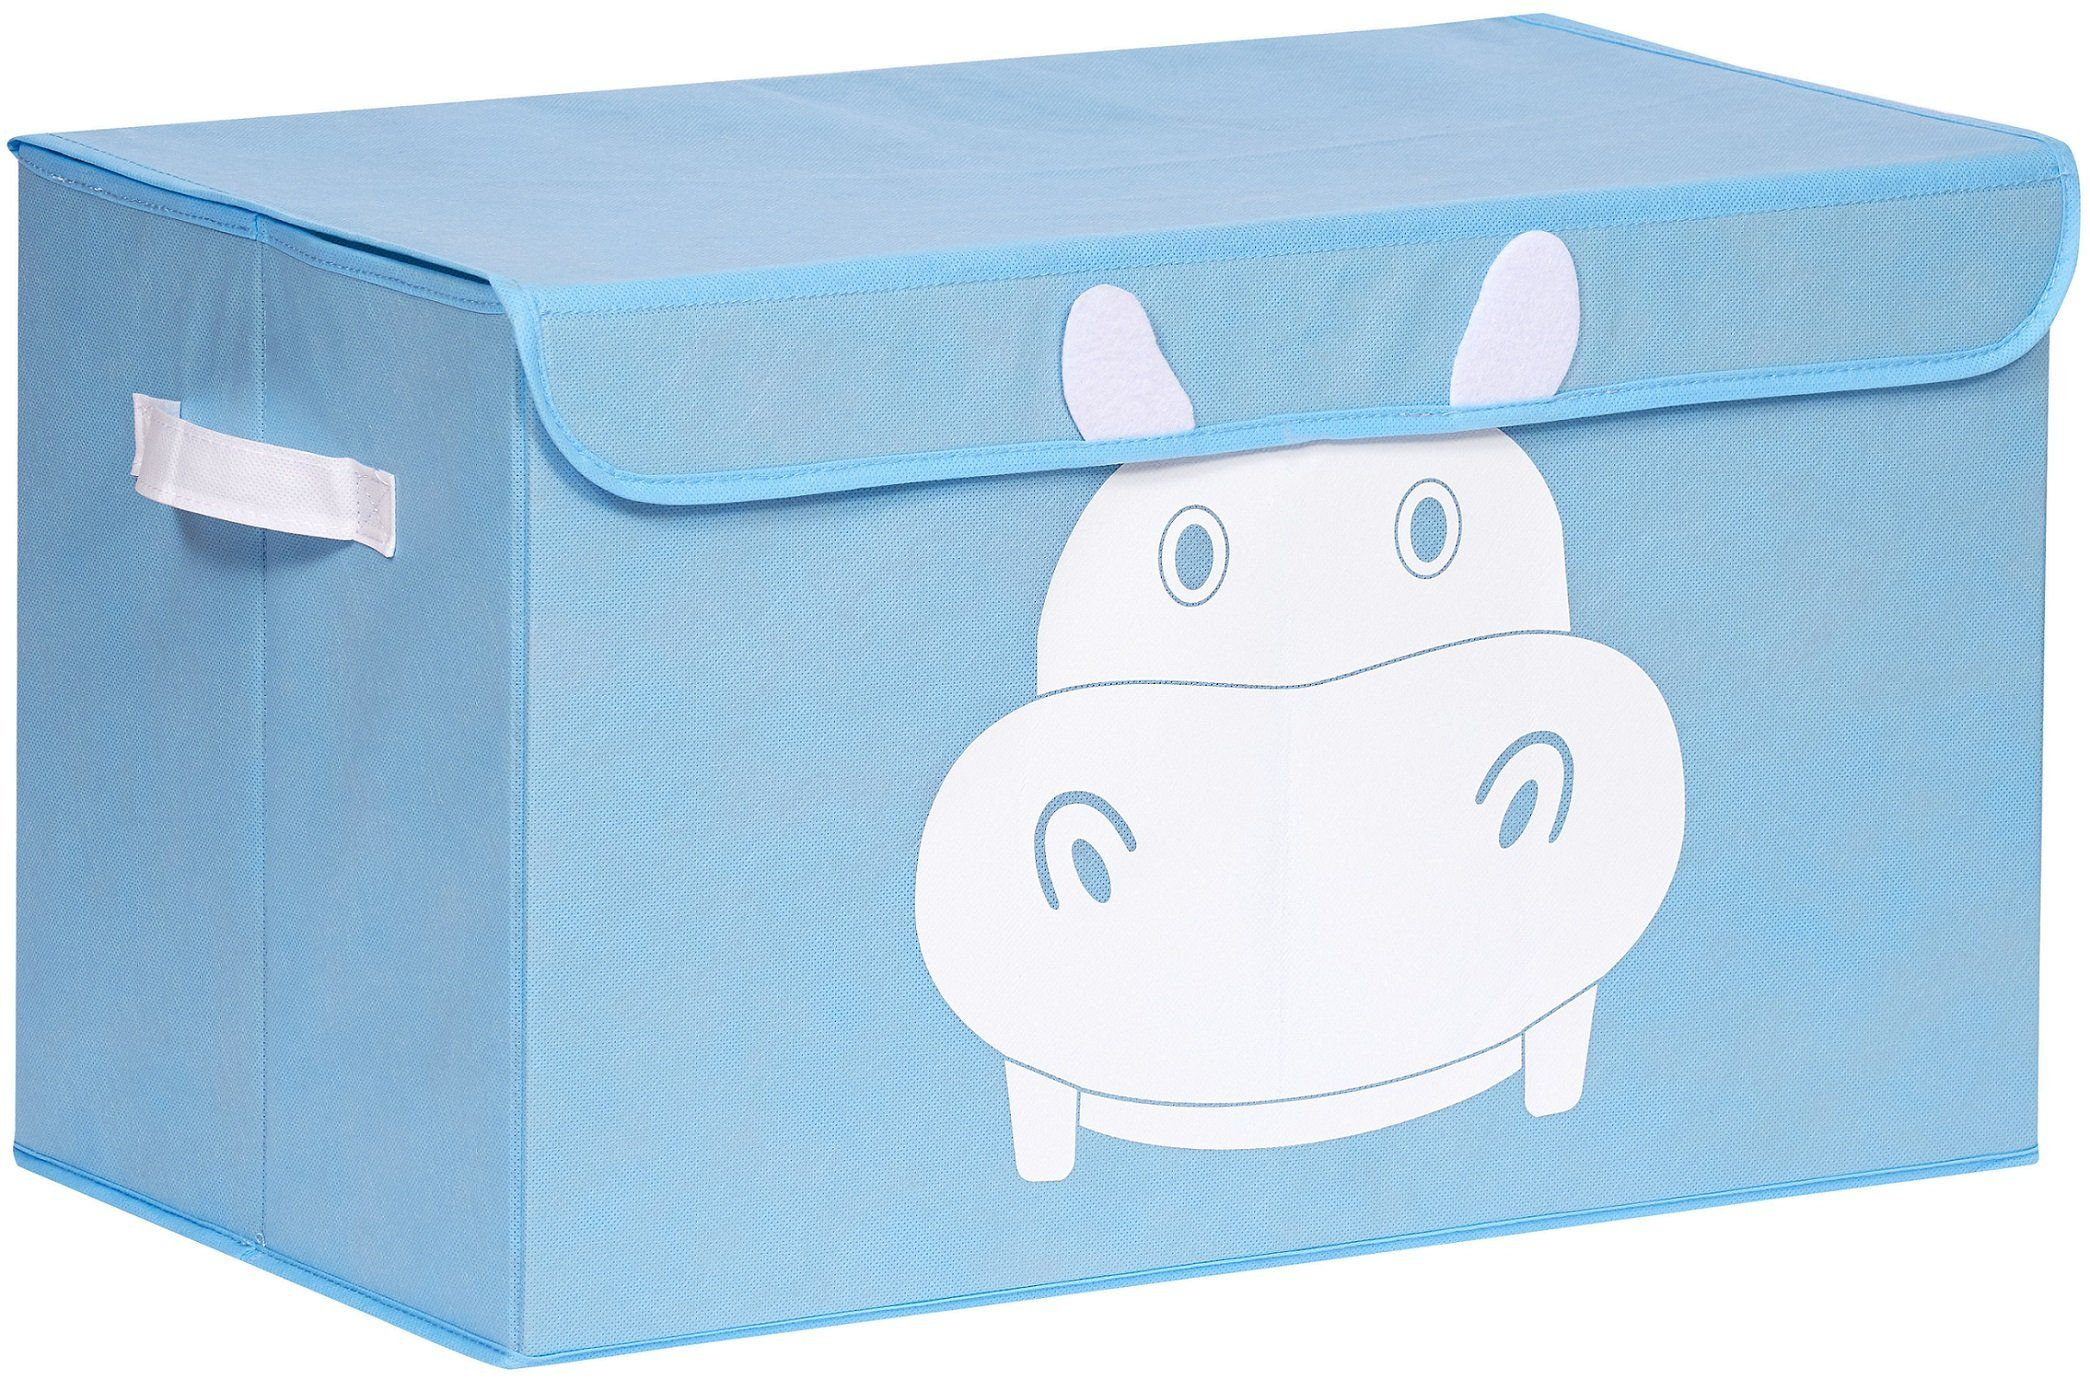 Katabird Storage Bin For Toy Storage Large Collapsible Chest Box within proportions 2090 X 1380